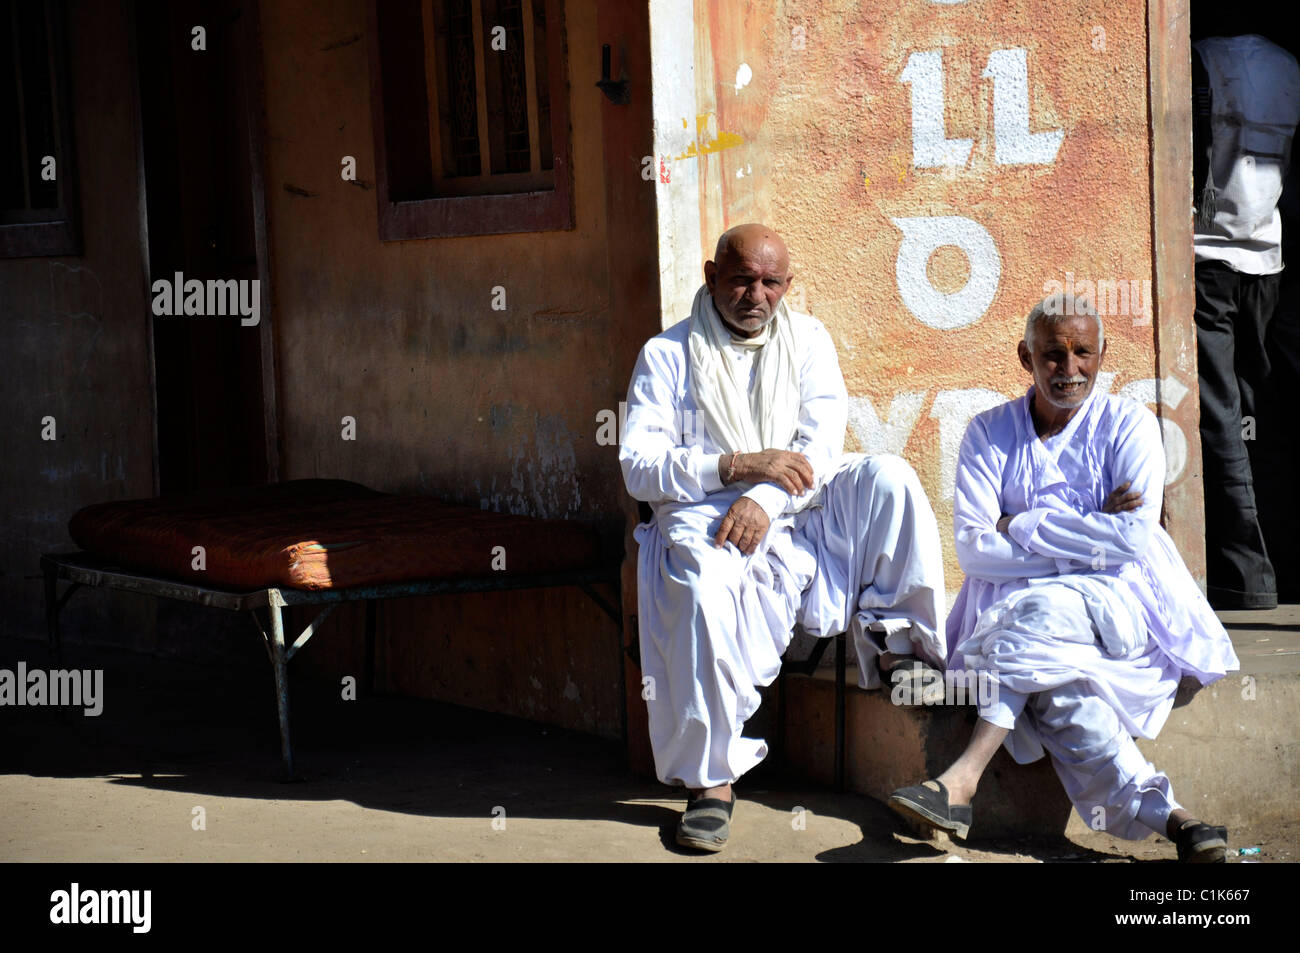 Two old Indian wearing traditional dress, sitting out side in winter season Stock Photo